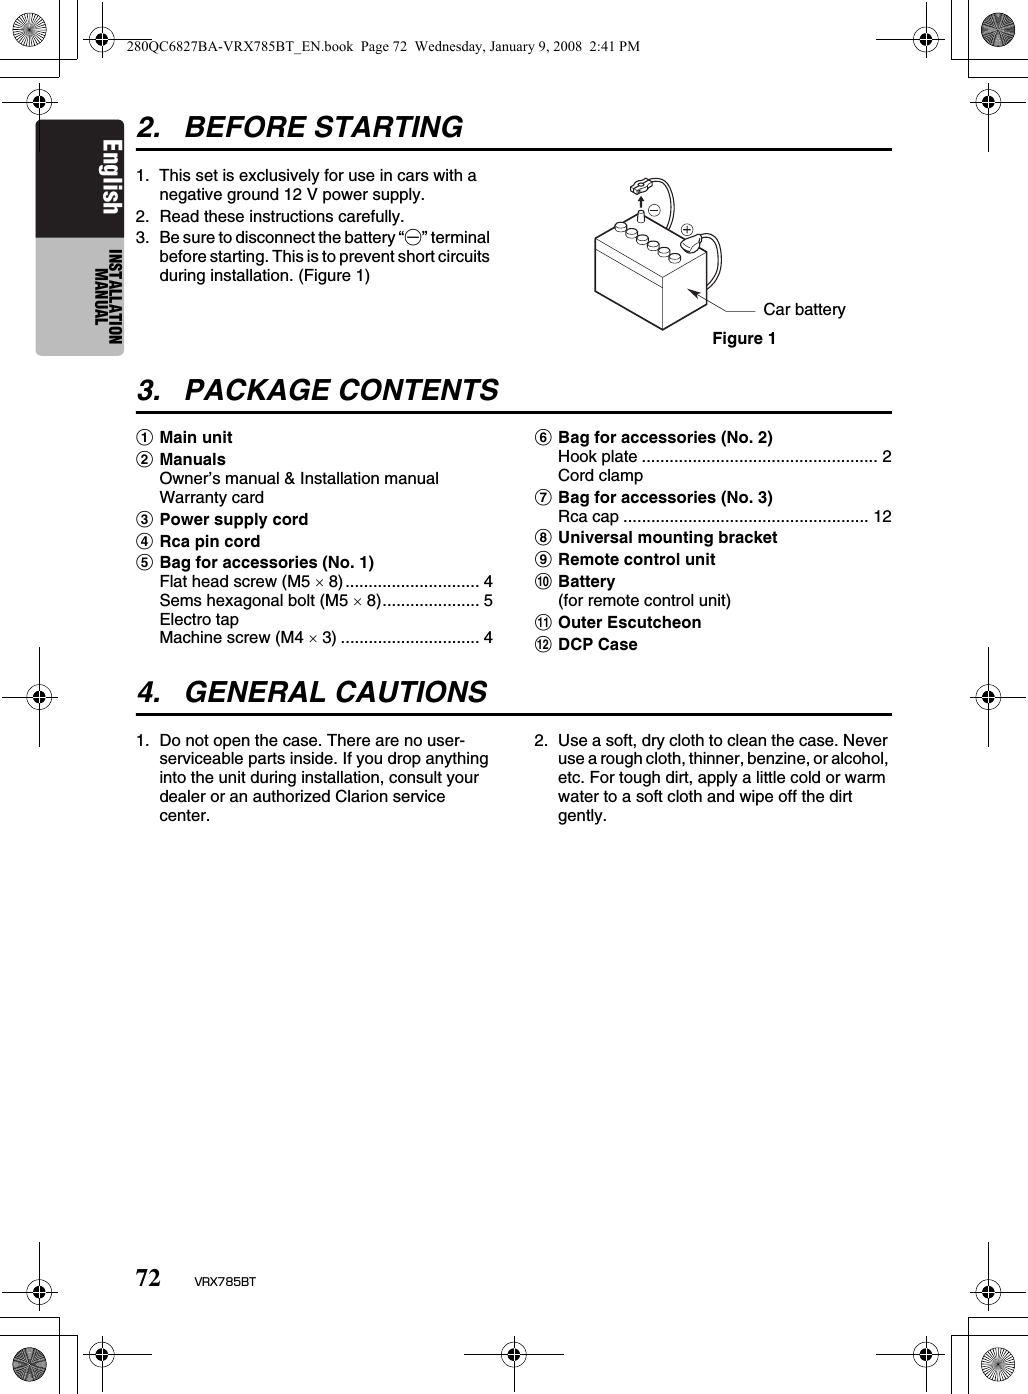 72 VRX785BTEnglish INSTALLATION MANUAL2. BEFORE STARTING1. This set is exclusively for use in cars with a negative ground 12 V power supply.2. Read these instructions carefully.3. Be sure to disconnect the battery “-” terminal before starting. This is to prevent short circuits during installation. (Figure 1)3. PACKAGE CONTENTS1Main unit2ManualsOwner’s manual &amp; Installation manual Warranty card3Power supply cord4Rca pin cord5Bag for accessories (No. 1)Flat head screw (M5 × 8)............................. 4Sems hexagonal bolt (M5 × 8)..................... 5Electro tapMachine screw (M4 × 3) .............................. 46Bag for accessories (No. 2)Hook plate ................................................... 2Cord clamp7Bag for accessories (No. 3)Rca cap ..................................................... 128Universal mounting bracket9Remote control unit0Battery(for remote control unit)!Outer Escutcheon@DCP Case4. GENERAL CAUTIONS1. Do not open the case. There are no user- serviceable parts inside. If you drop anything into the unit during installation, consult your dealer or an authorized Clarion service center.2. Use a soft, dry cloth to clean the case. Never use a rough cloth, thinner, benzine, or alcohol, etc. For tough dirt, apply a little cold or warm water to a soft cloth and wipe off the dirt gently.Car batteryFigure 1280QC6827BA-VRX785BT_EN.book  Page 72  Wednesday, January 9, 2008  2:41 PM